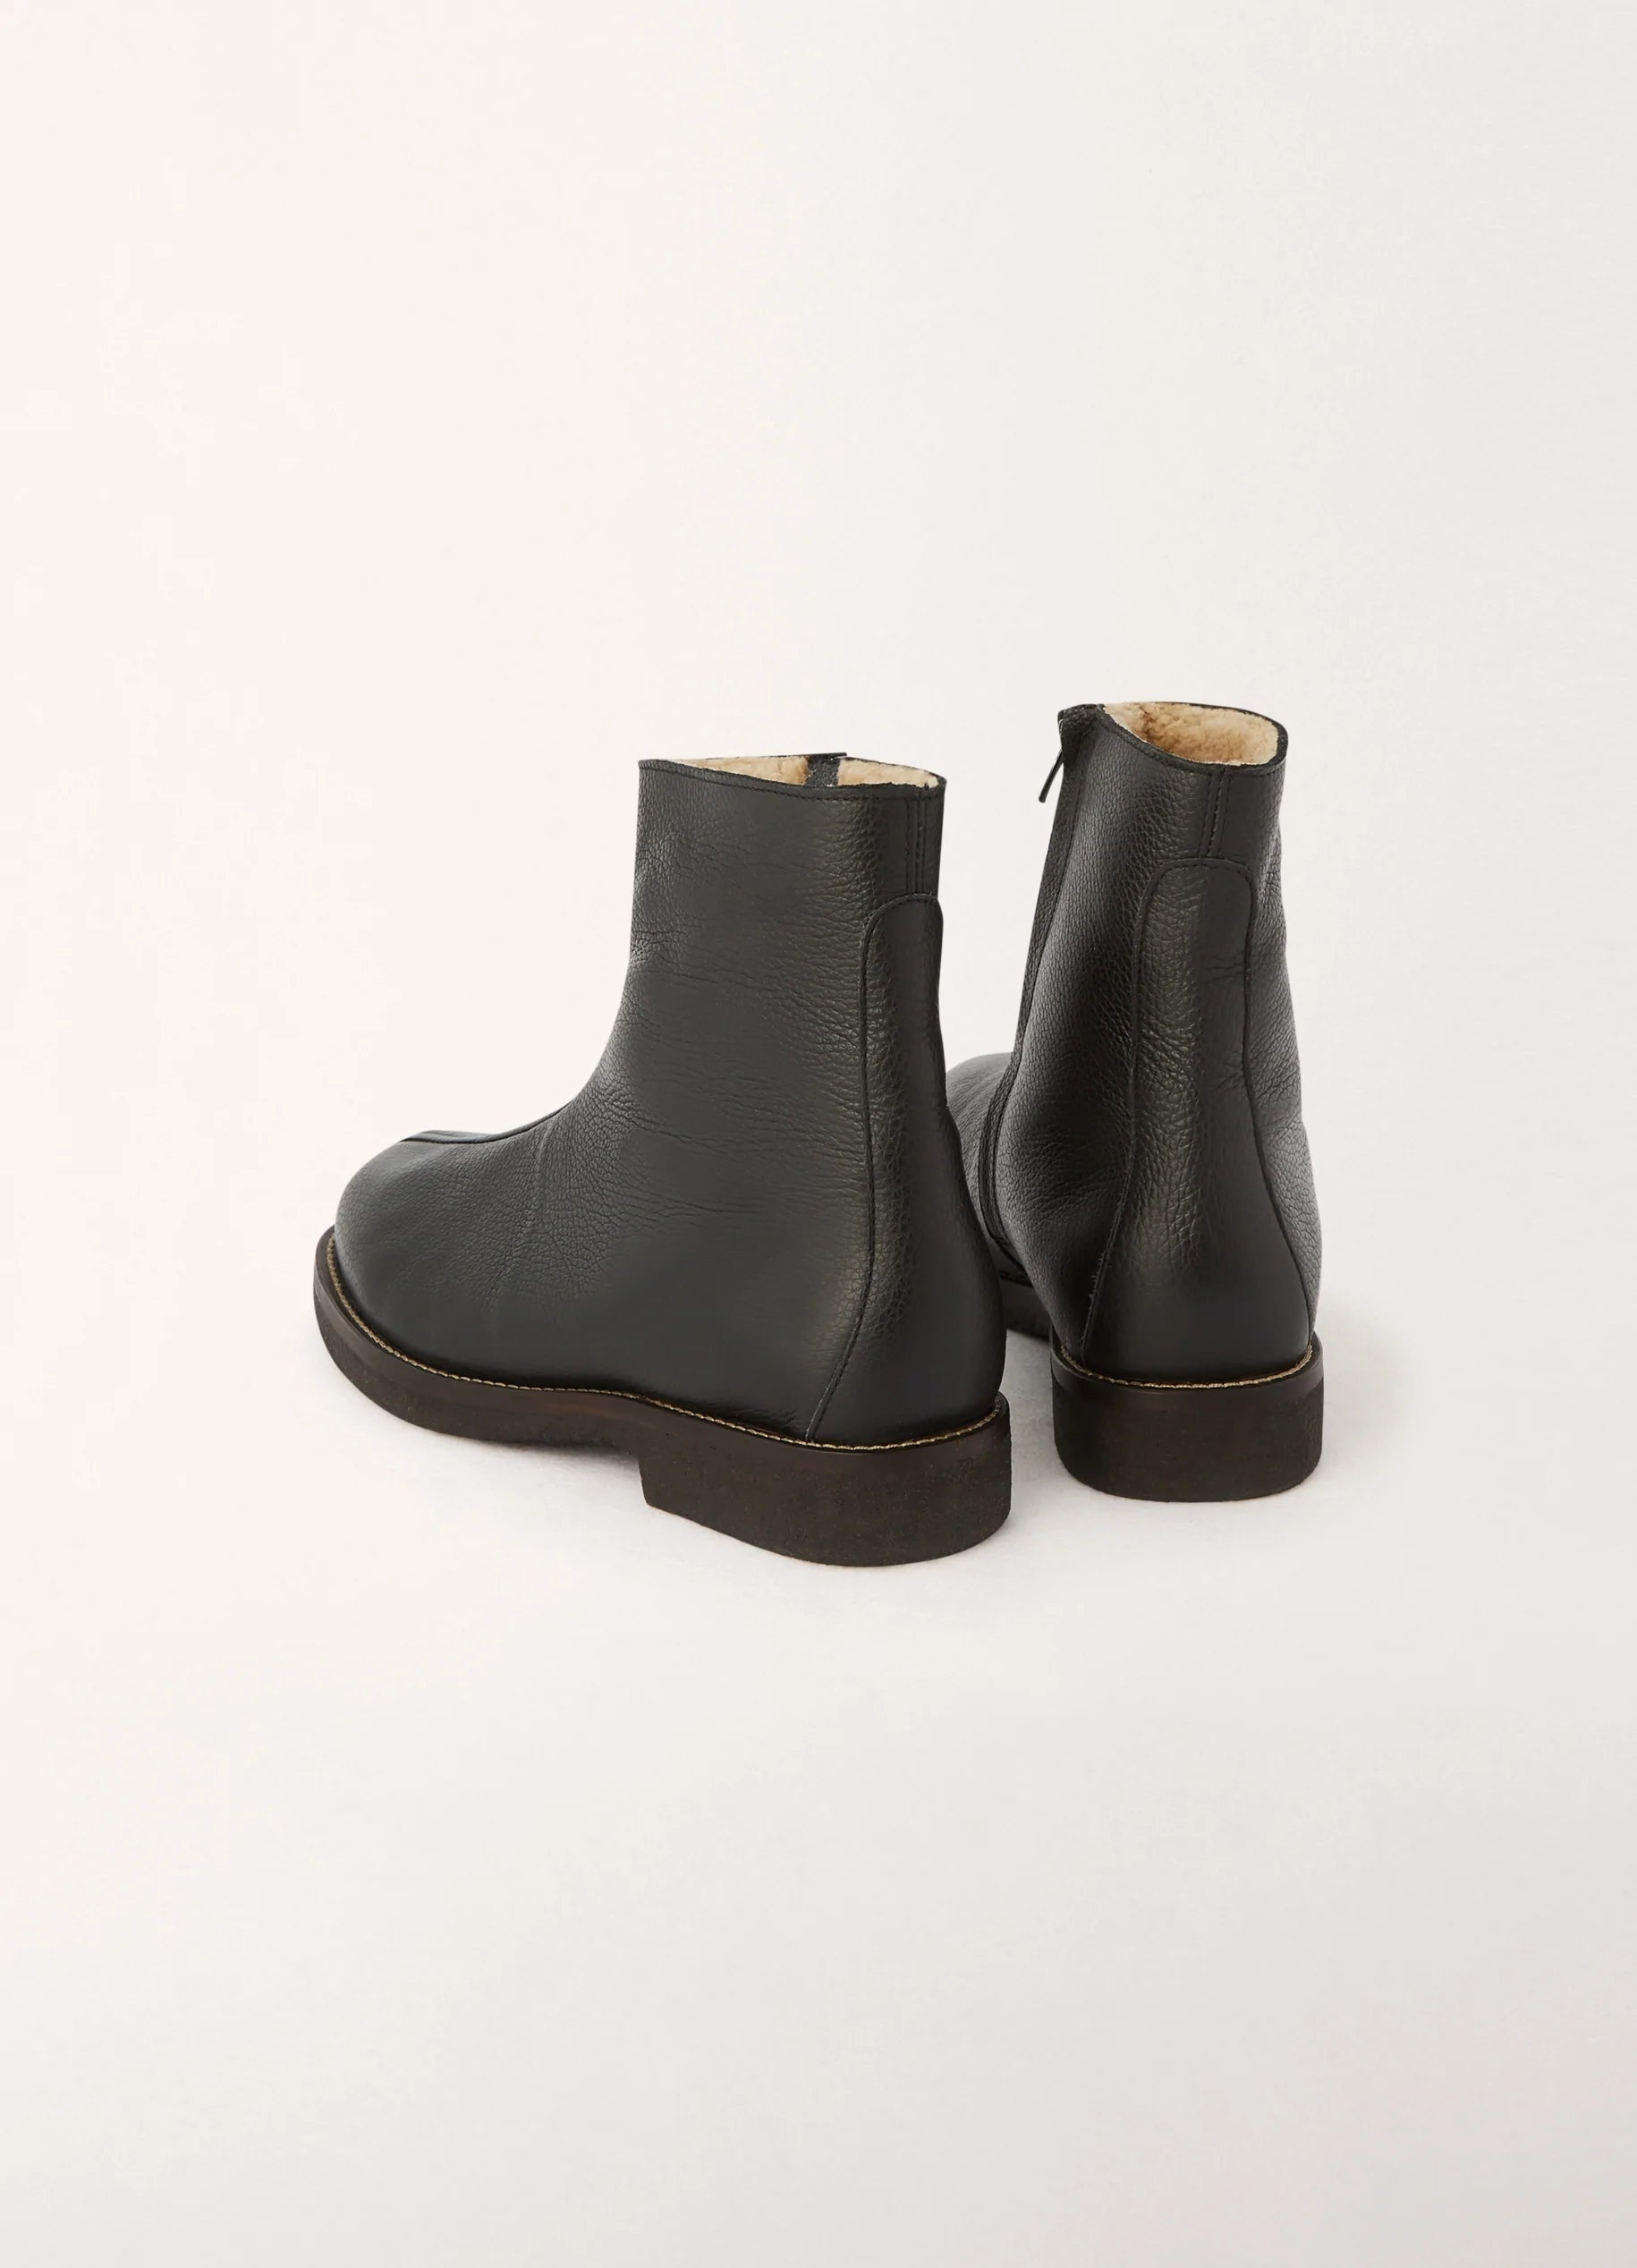 BOOTS WITH SHEARLING
GRAINE CALF LTH - 4